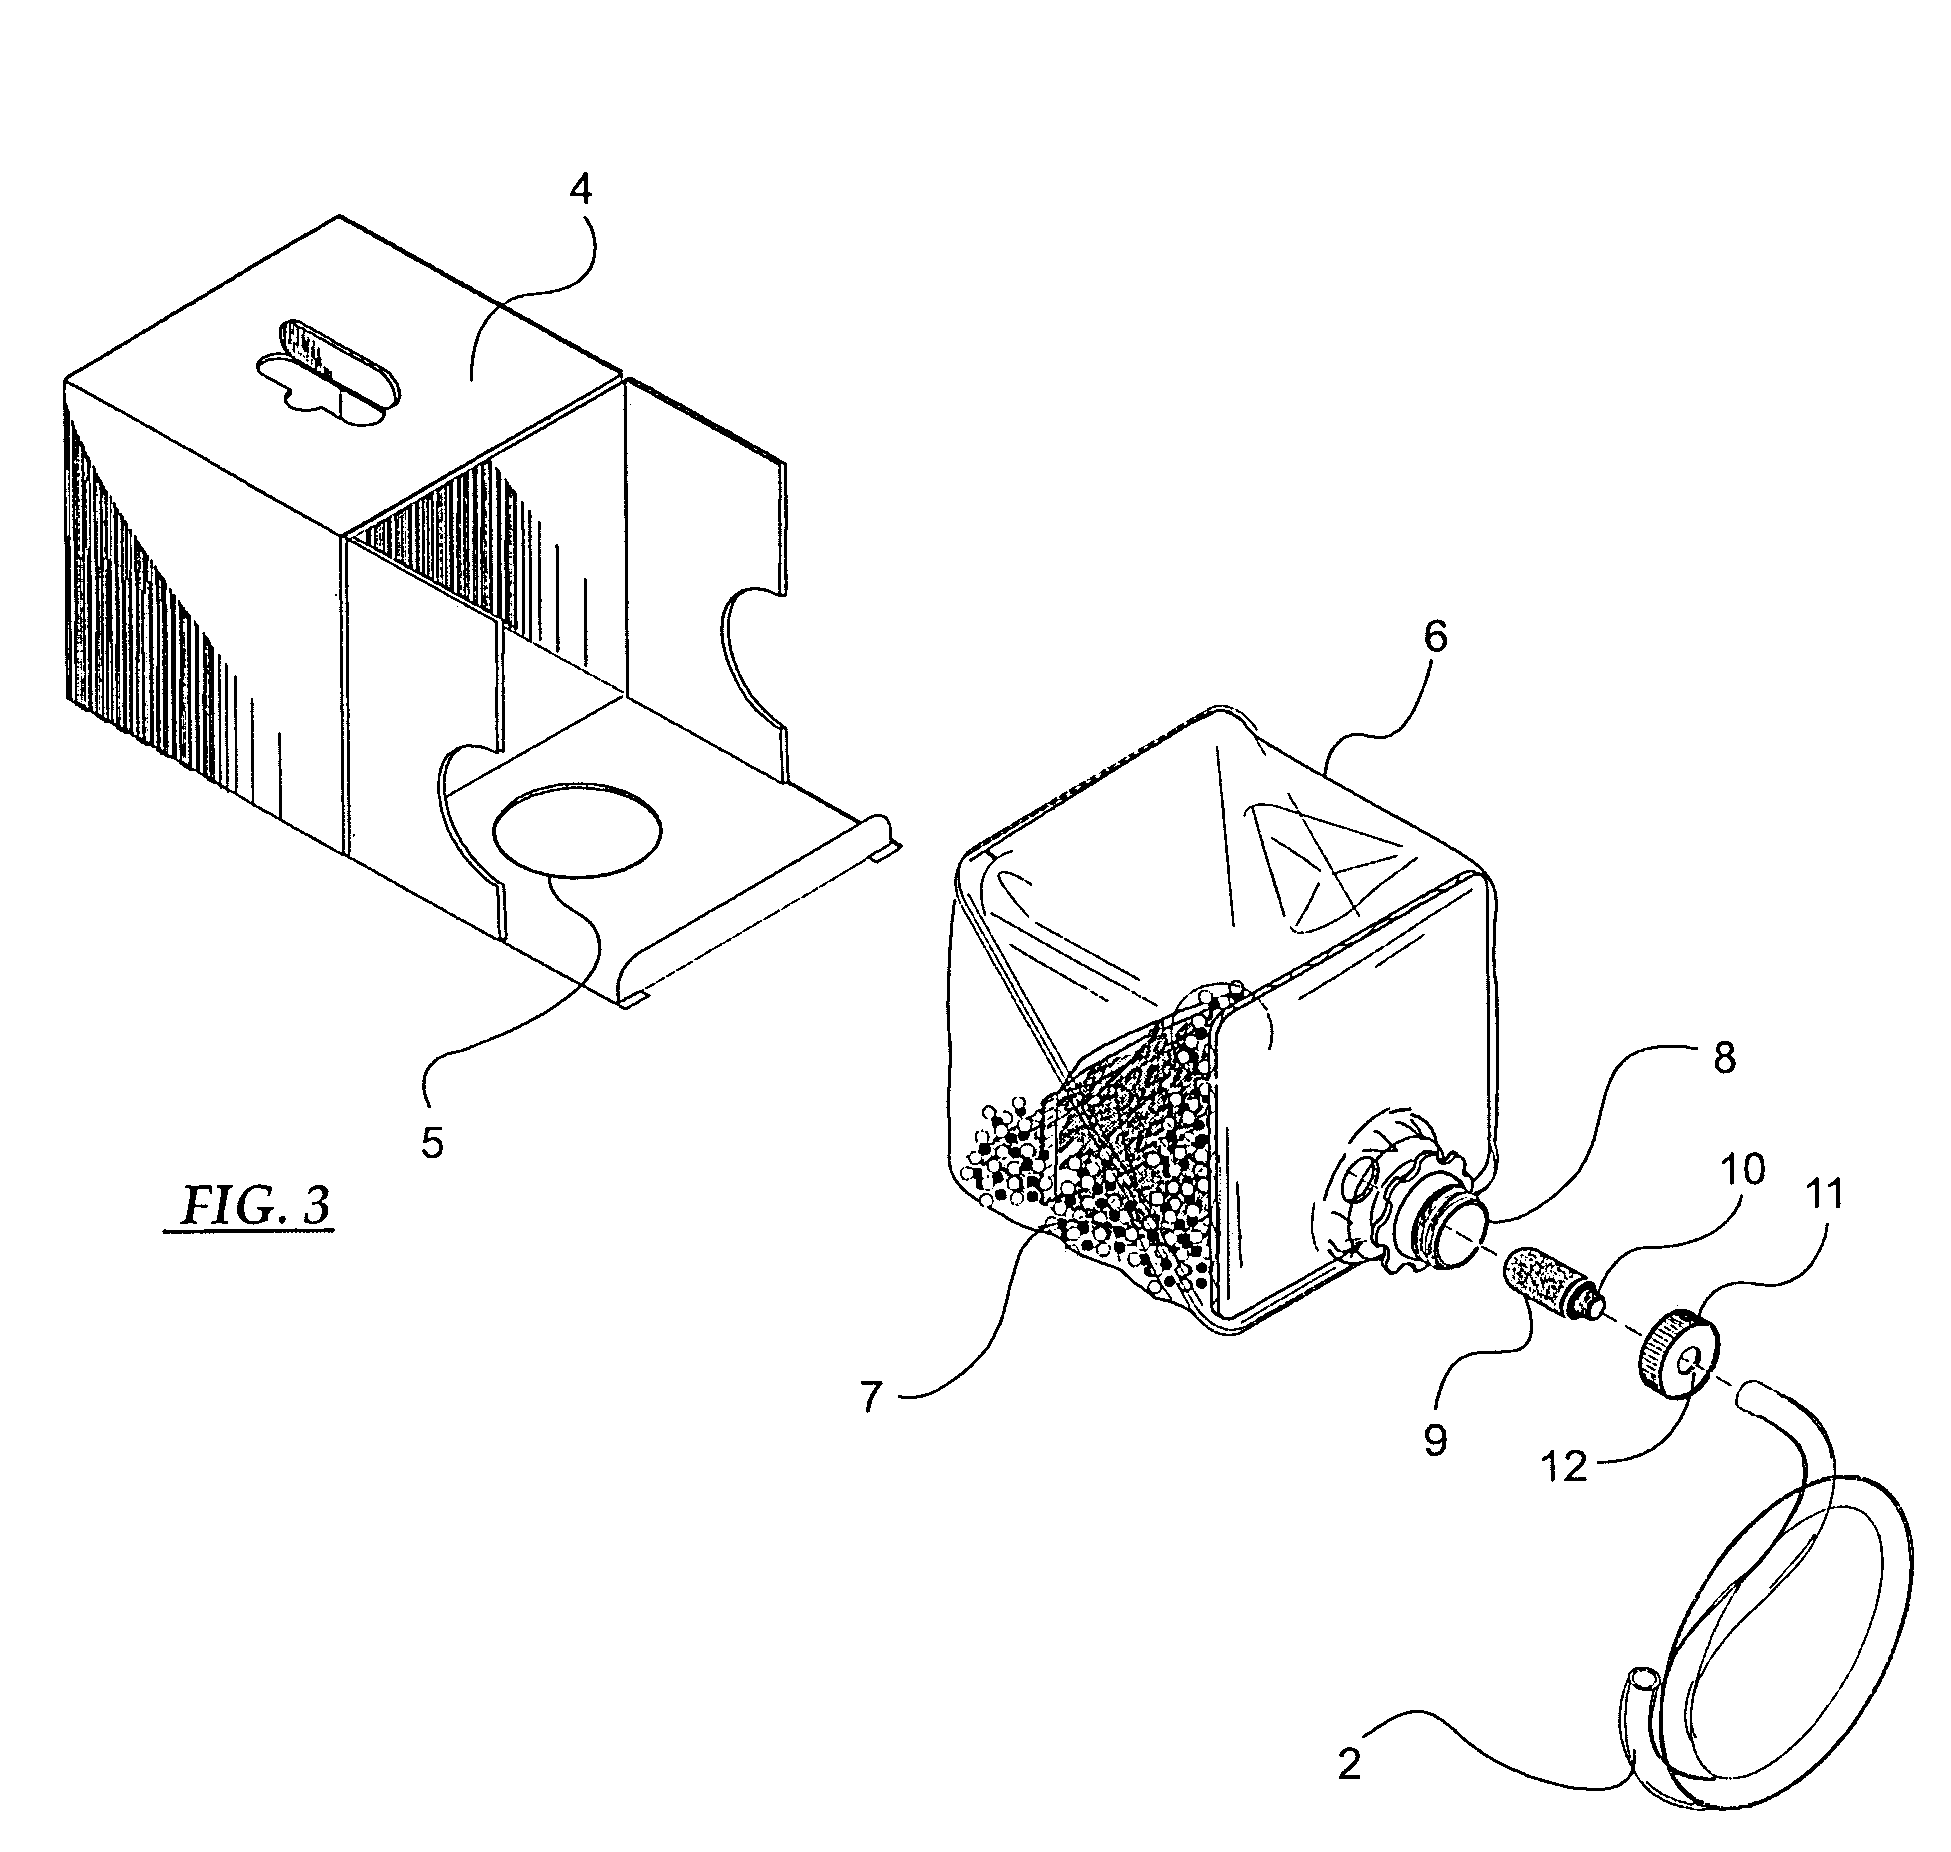 Apparatus and method for remediation of a waste stream